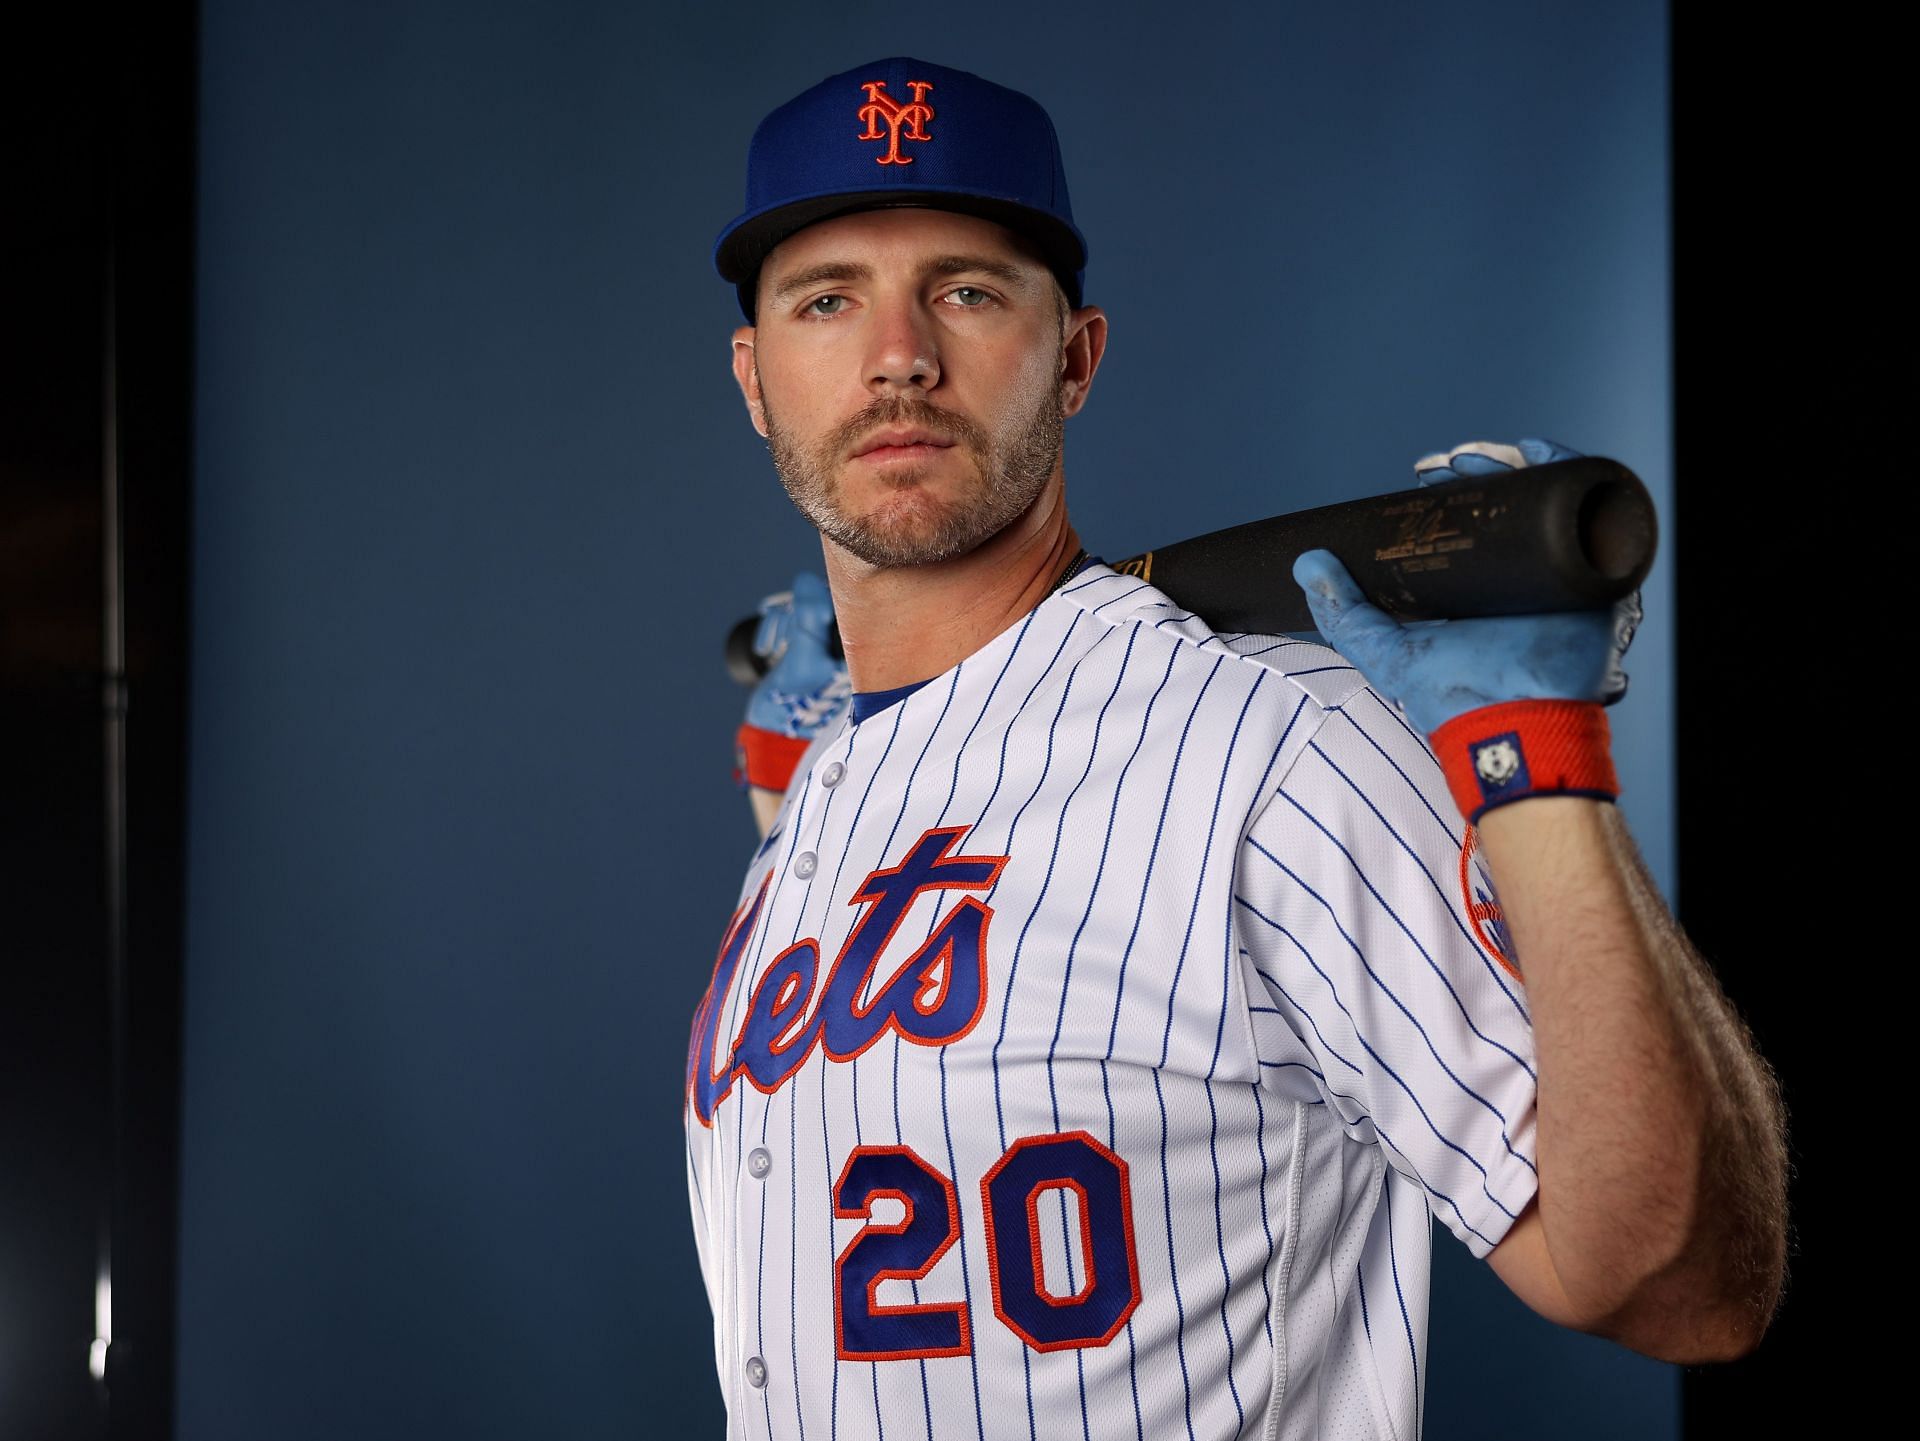 New York Mets fans react to Pete Alonso hitting a home run after